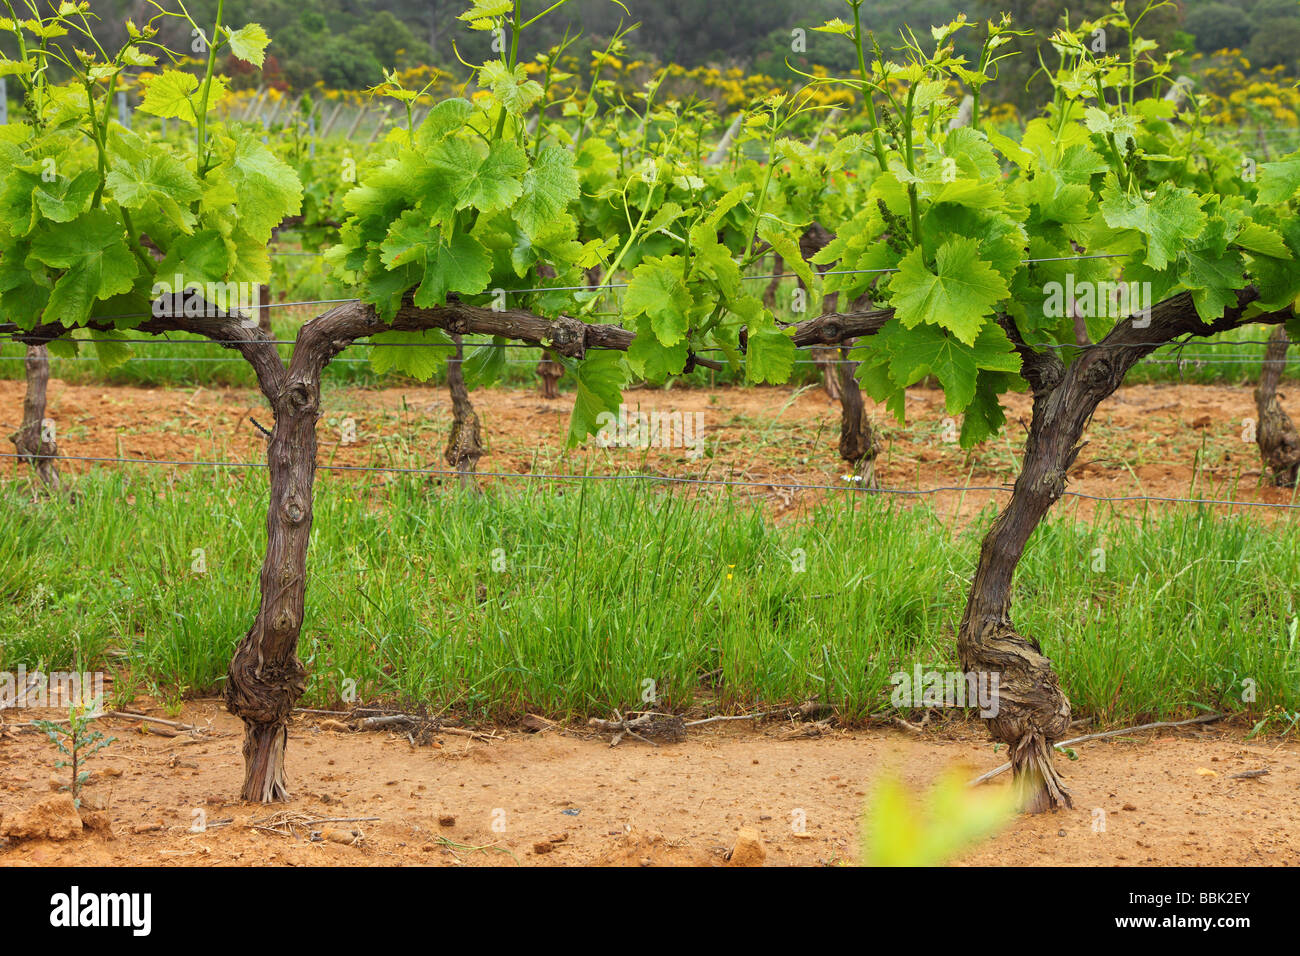 Vine grapes with young green spring leaves Minervois Languedoc-Rousillon France Vitis vinifera Stock Photo